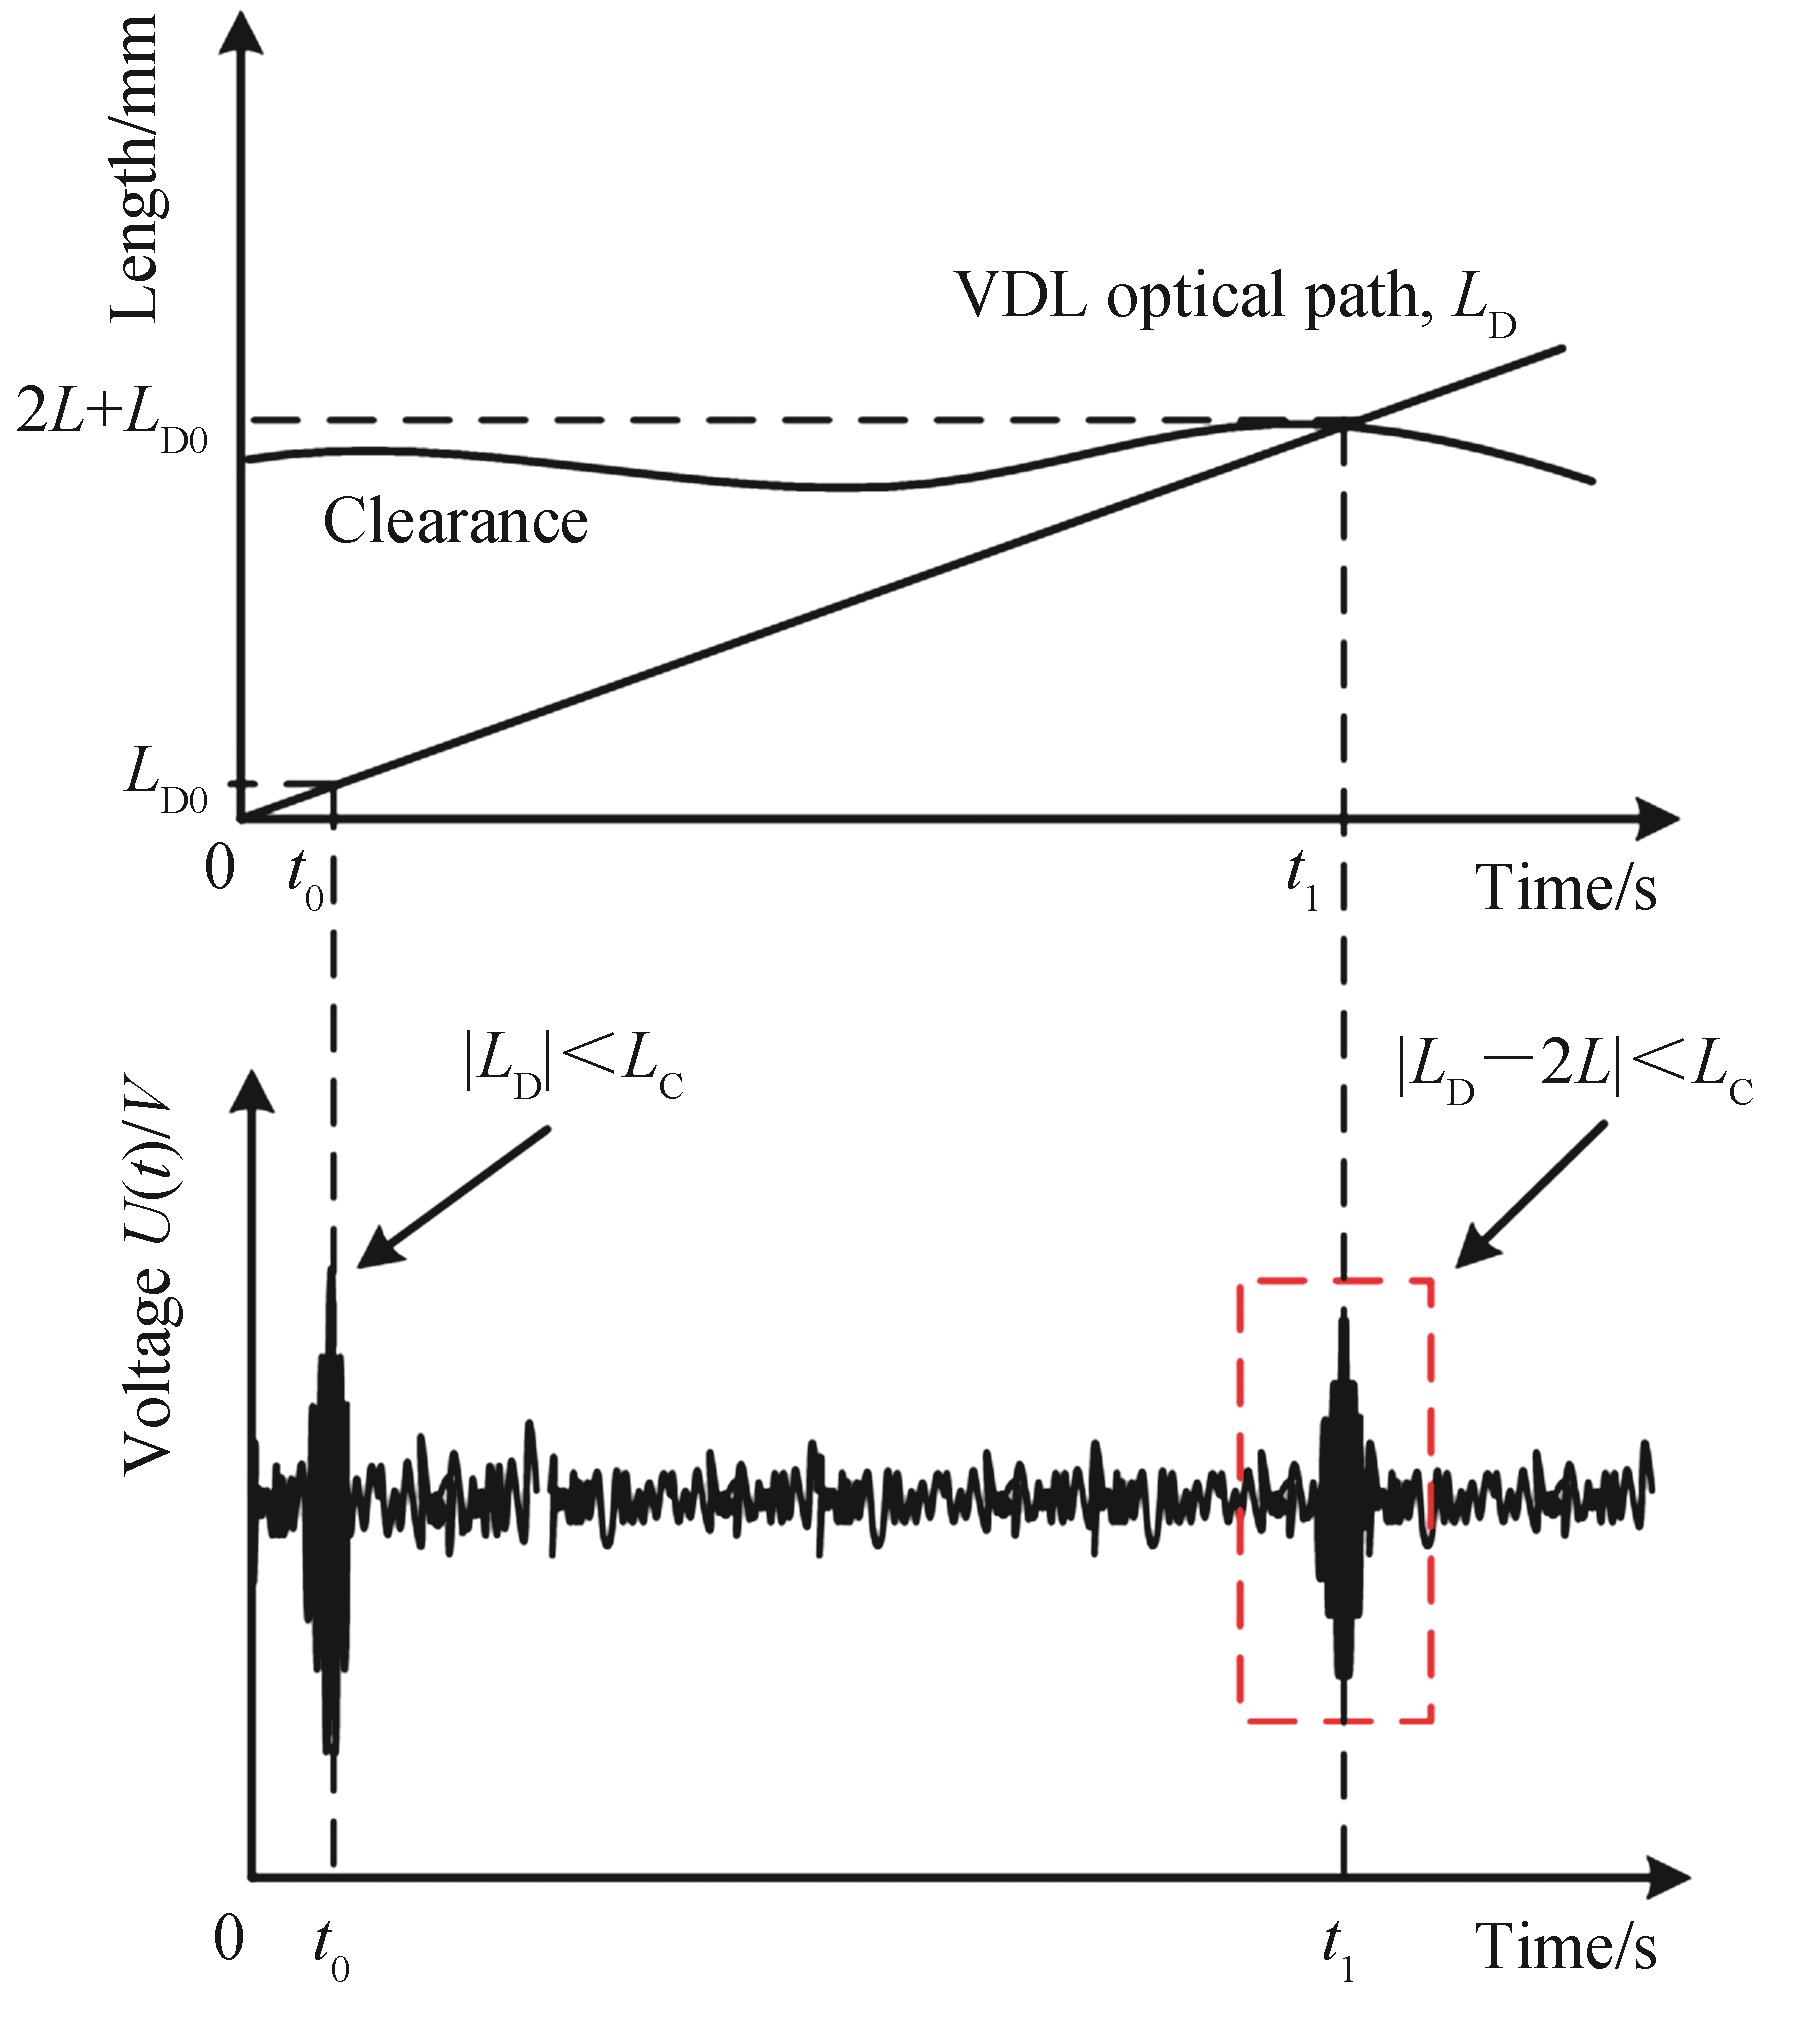 The relationship between output voltage and VDL optical path and clearance